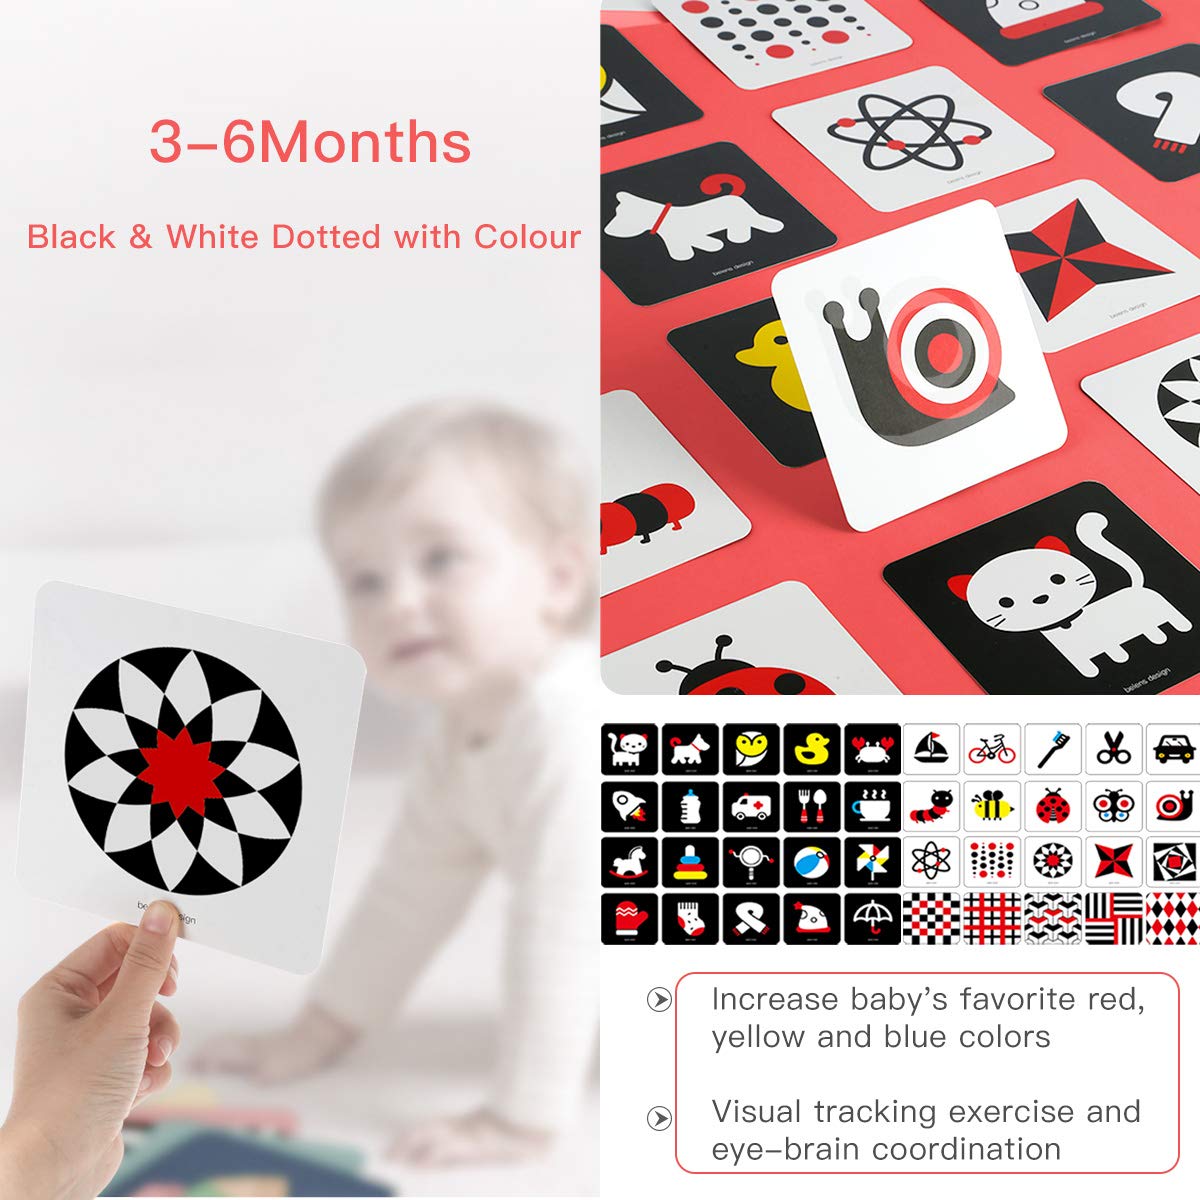 beiens High Contrast Baby Flashcard, 80 PCs 160 Page Black White Colorful Visual Stimulation Learning Activity Card for Babies Ages 0-36 Months, 5.5'' x 5.5'' Educational Newborn Infants Toys Gift